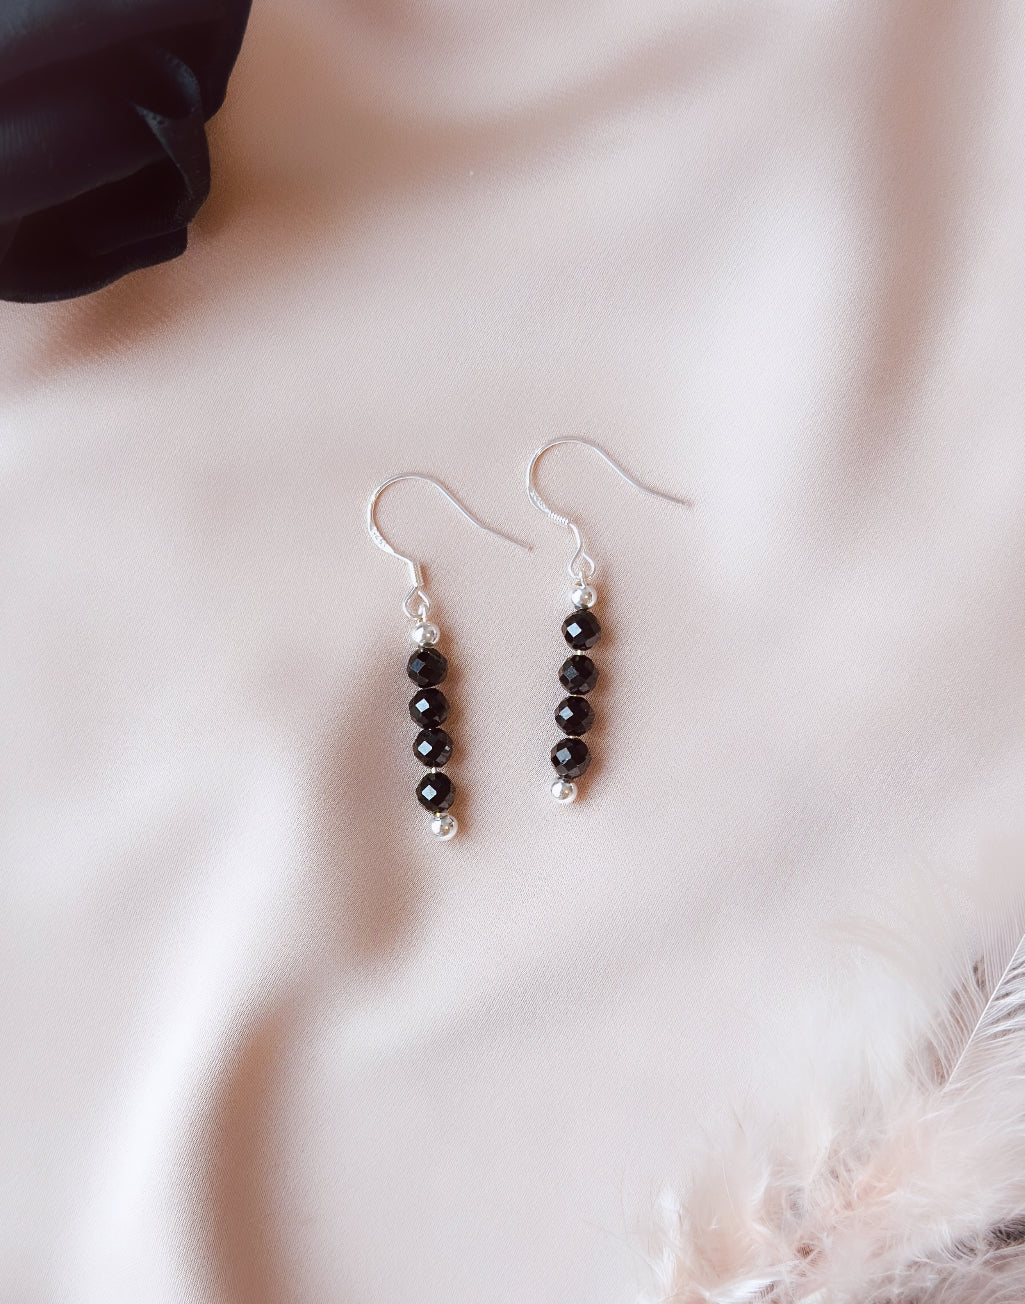 The Elara earrings, crafted with sterling silver and adorned with black faceted onyx beads, are not only a stylish accessory but also possess beautiful healing properties.  Onyx is associated with strength and protection, promoting emotional balance and self-control.